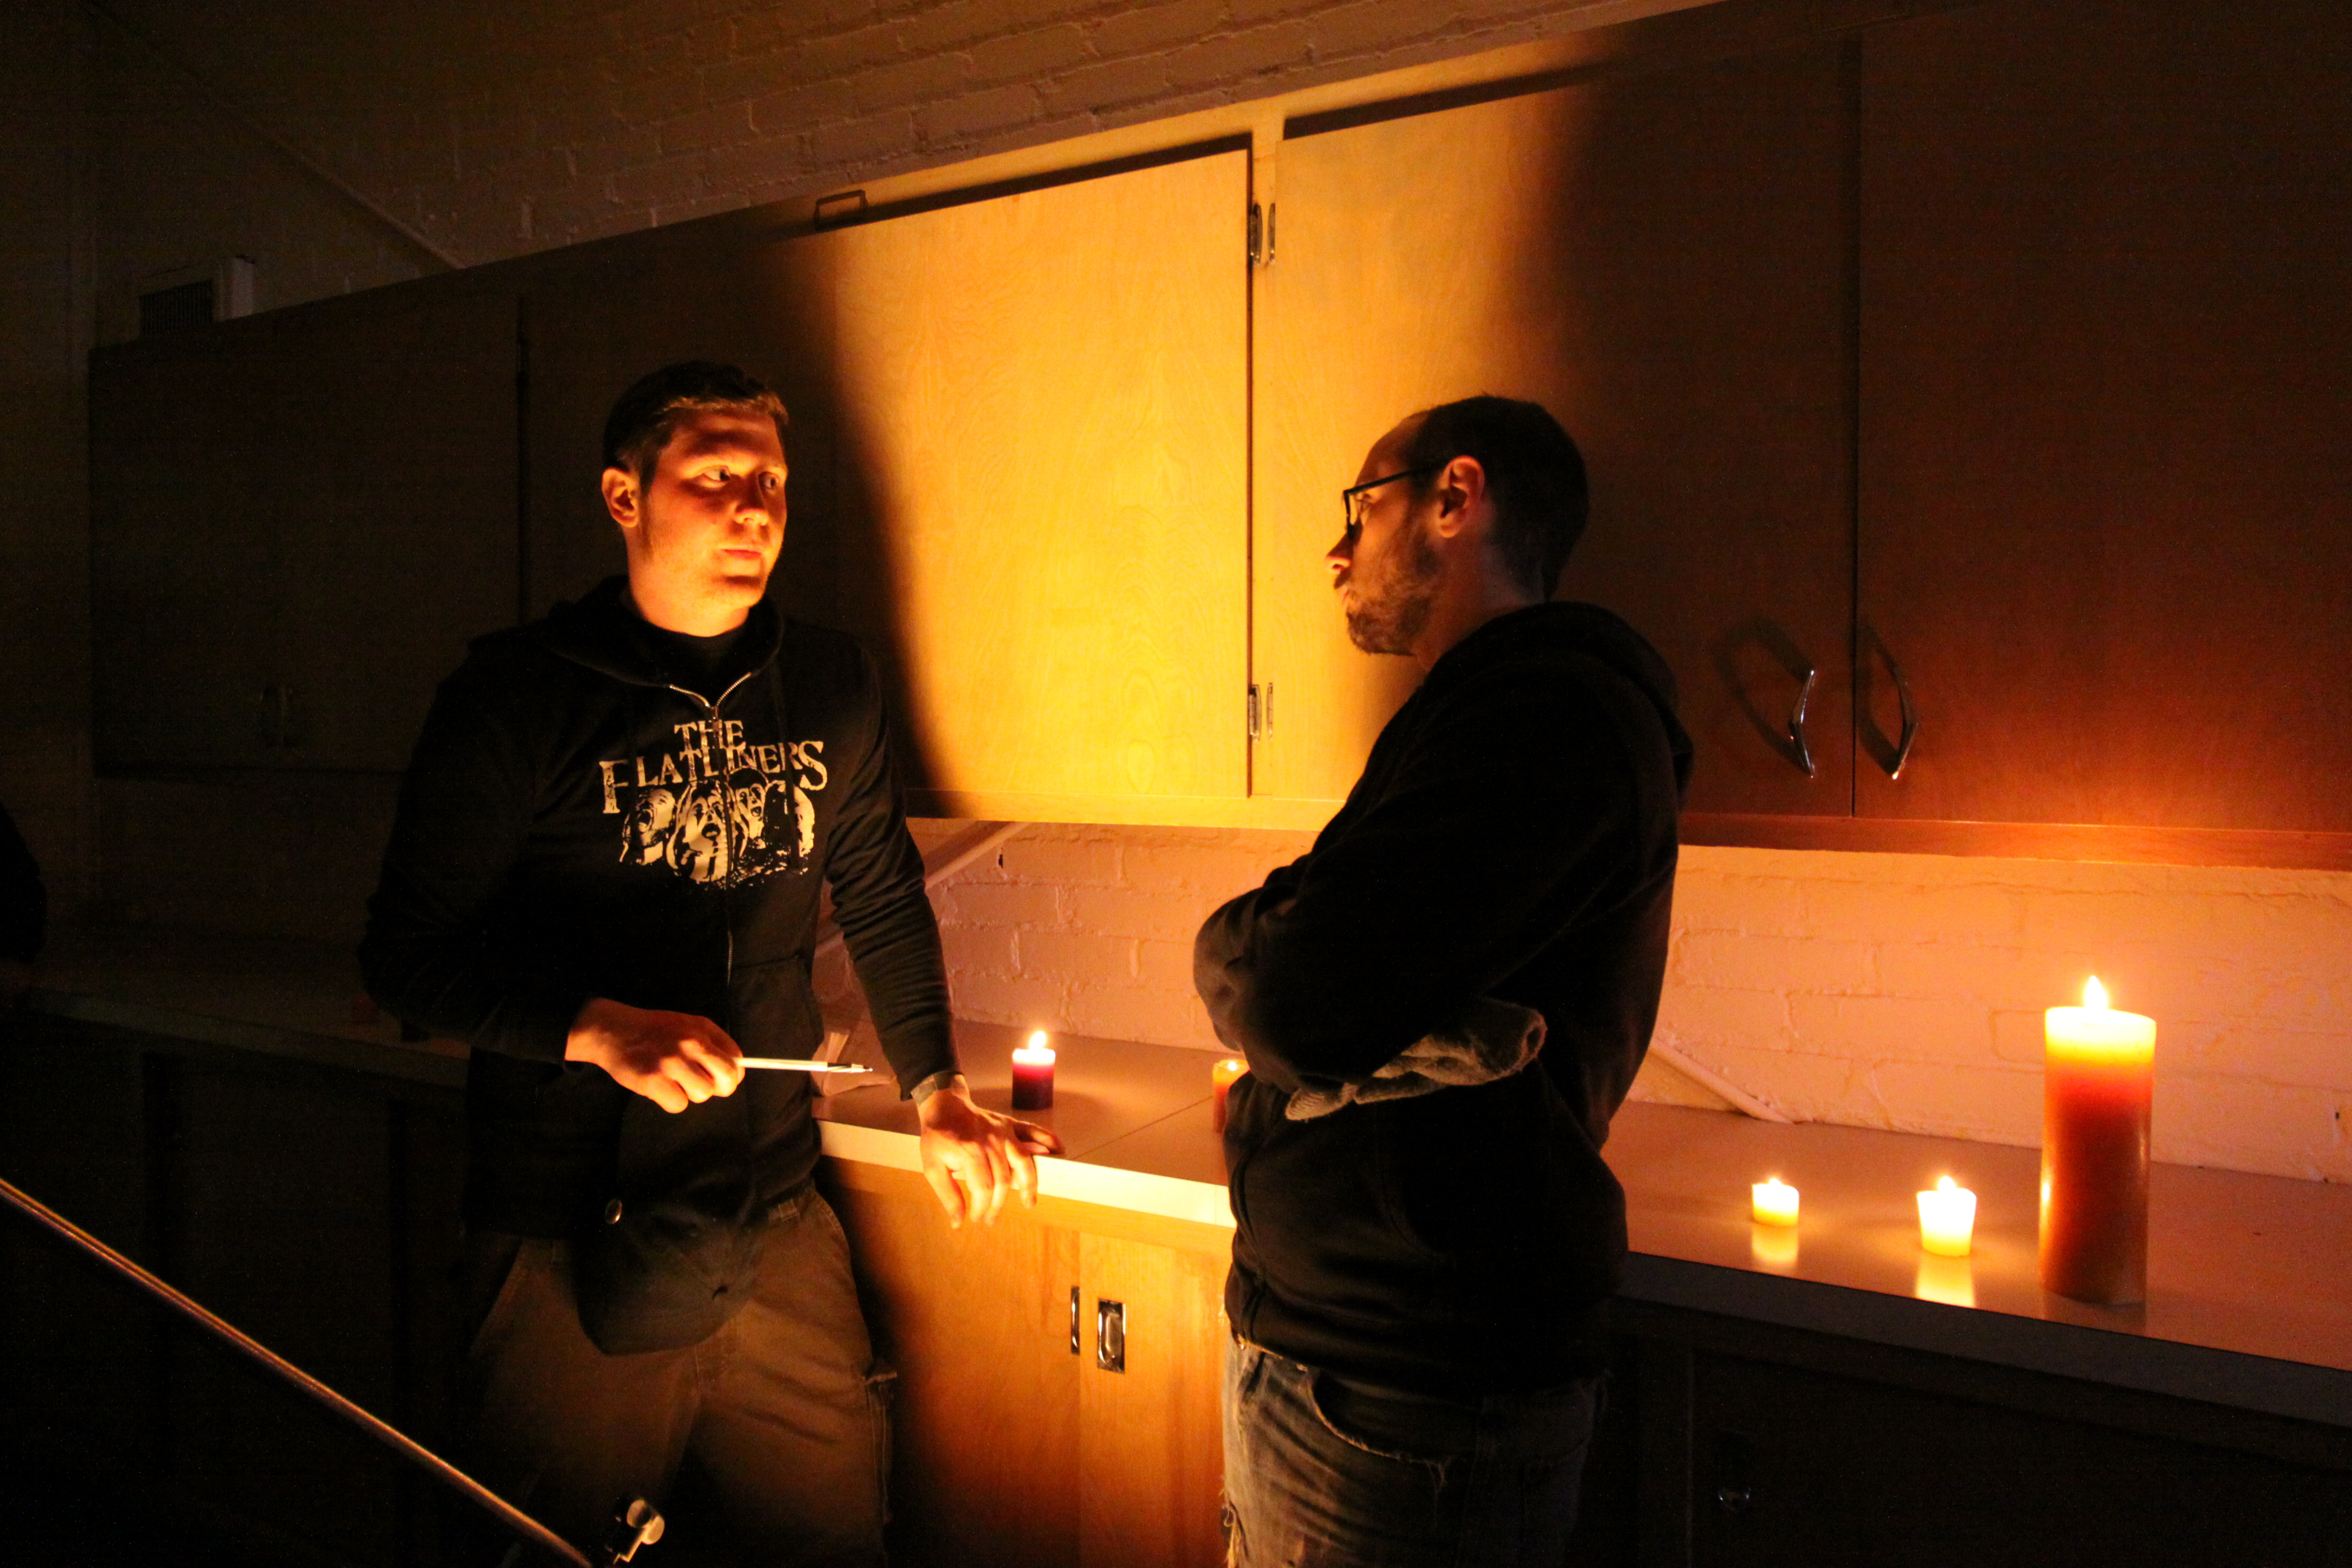 Co-writer/co-director team John Pata and Adam Bartlett stand in while director of photography Travis Auclair adjusts lighting on the set of Dead Weight.